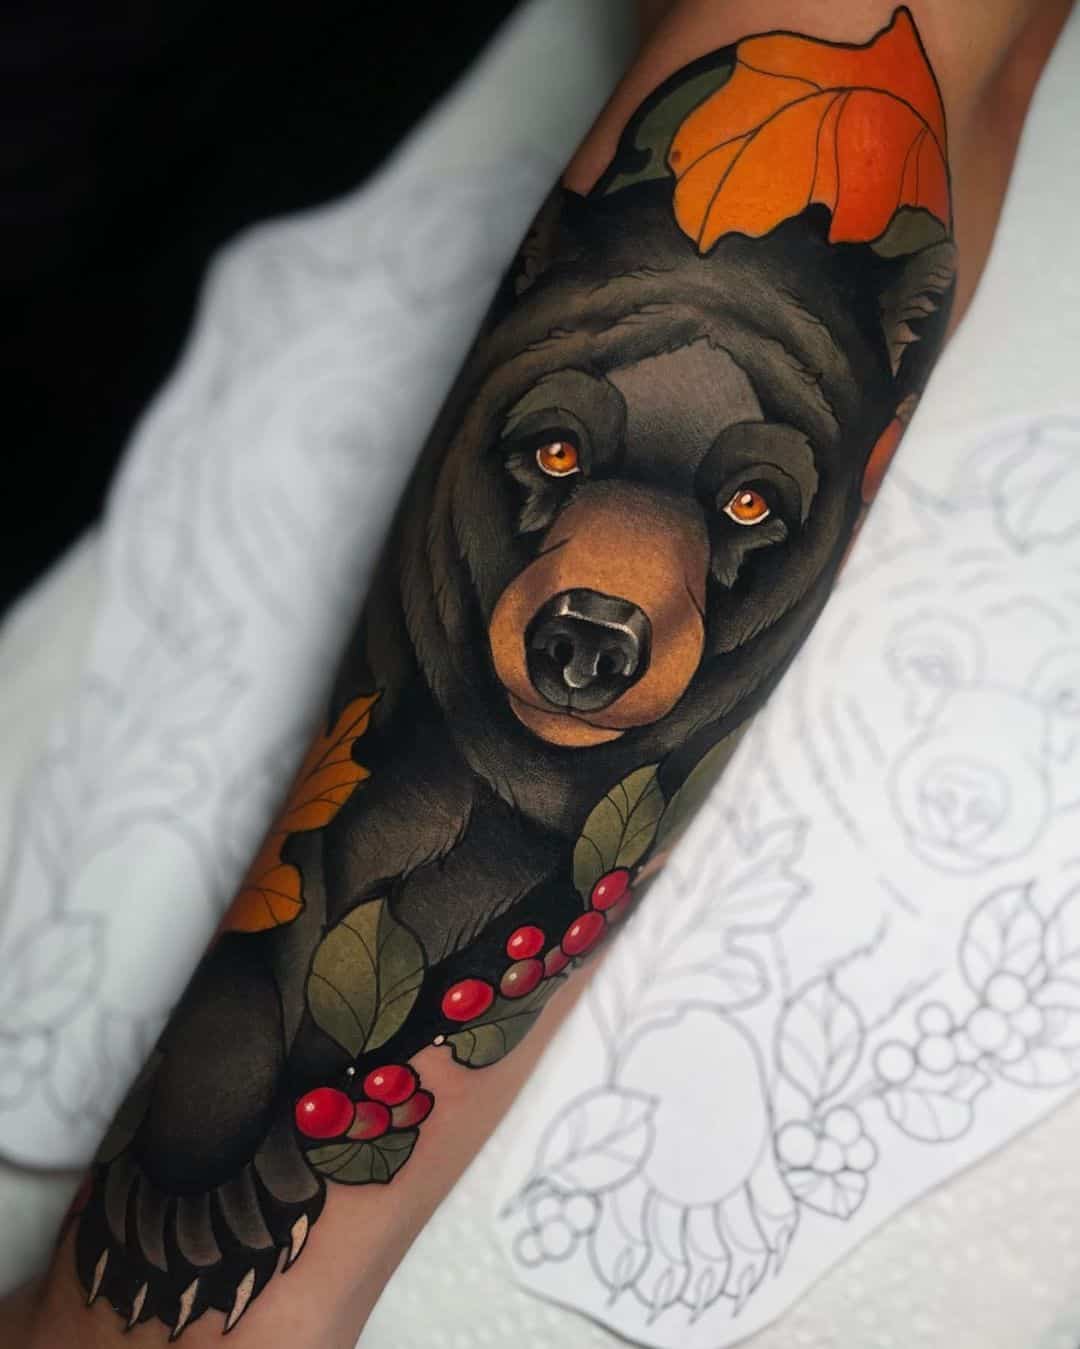 55 Awesome Bear Tattoos With Meaning - Our Mindful Life | Bear tattoos,  Teddy bear tattoos, Grizzly bear tattoos